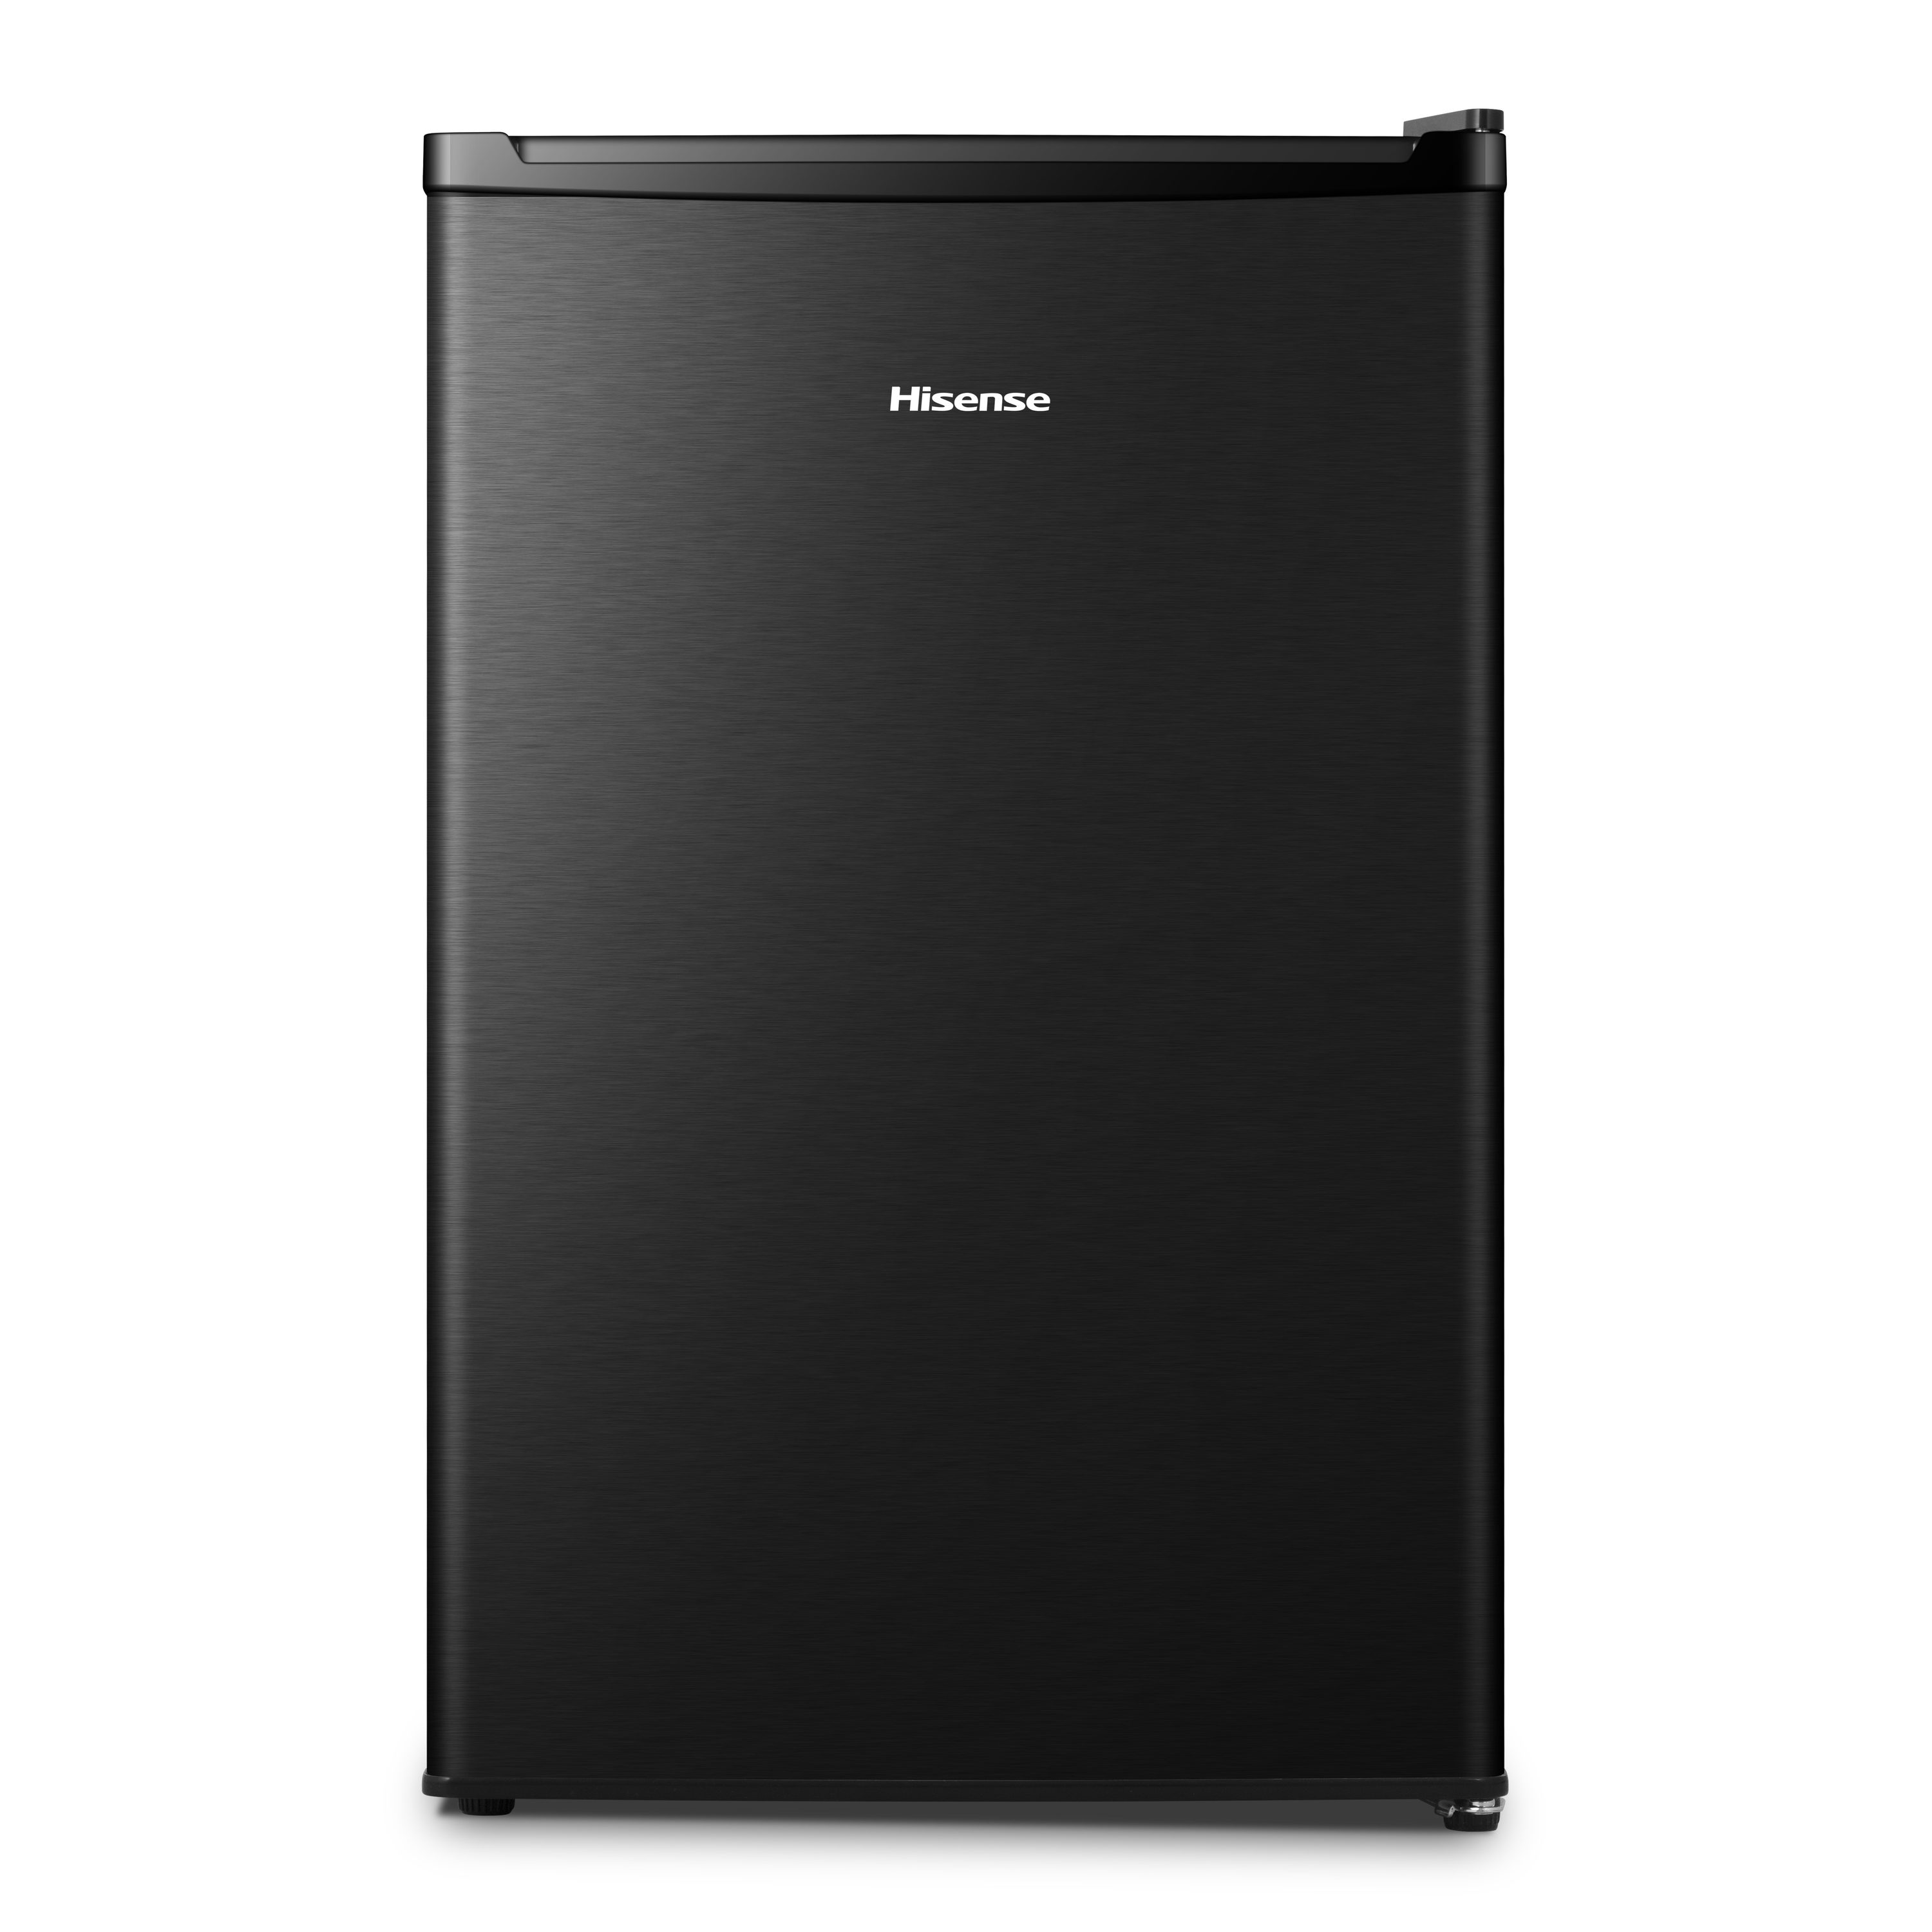 Hisense 4.4 Cubic Foot Compact Refrigerator in Stainless Steel REFURBISHED 